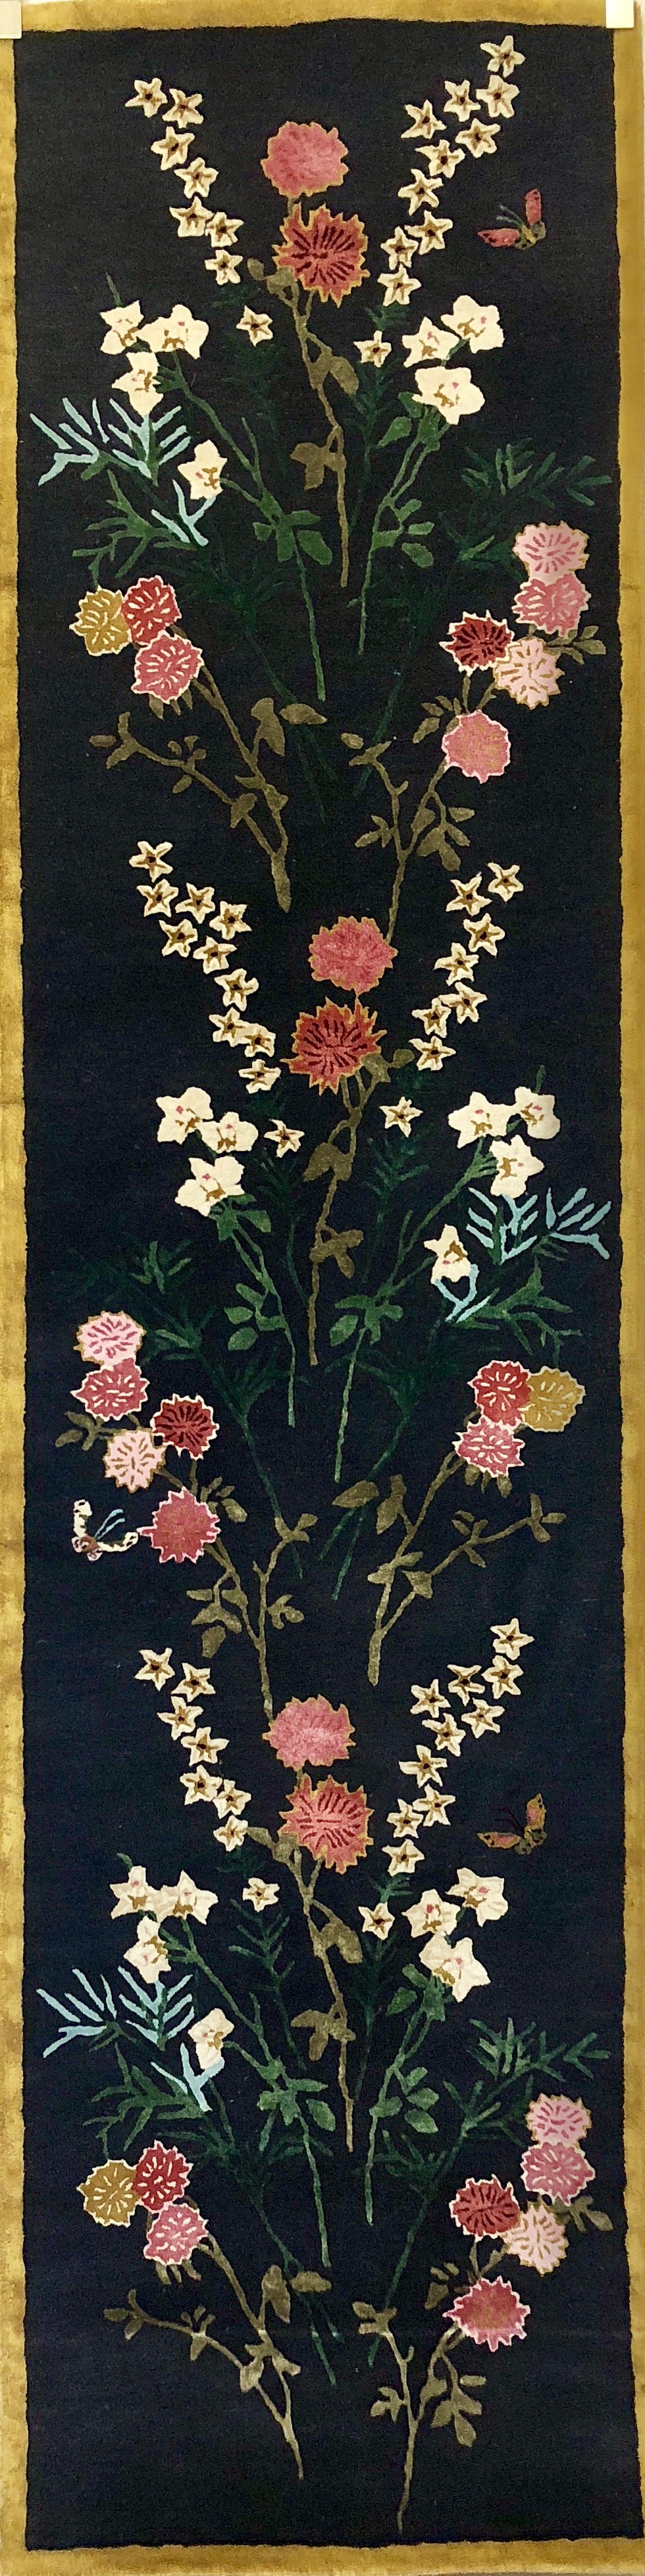 Wendy Morrison Flowers of Virtue Graphite Hand Tufted Rug, 5' x 8